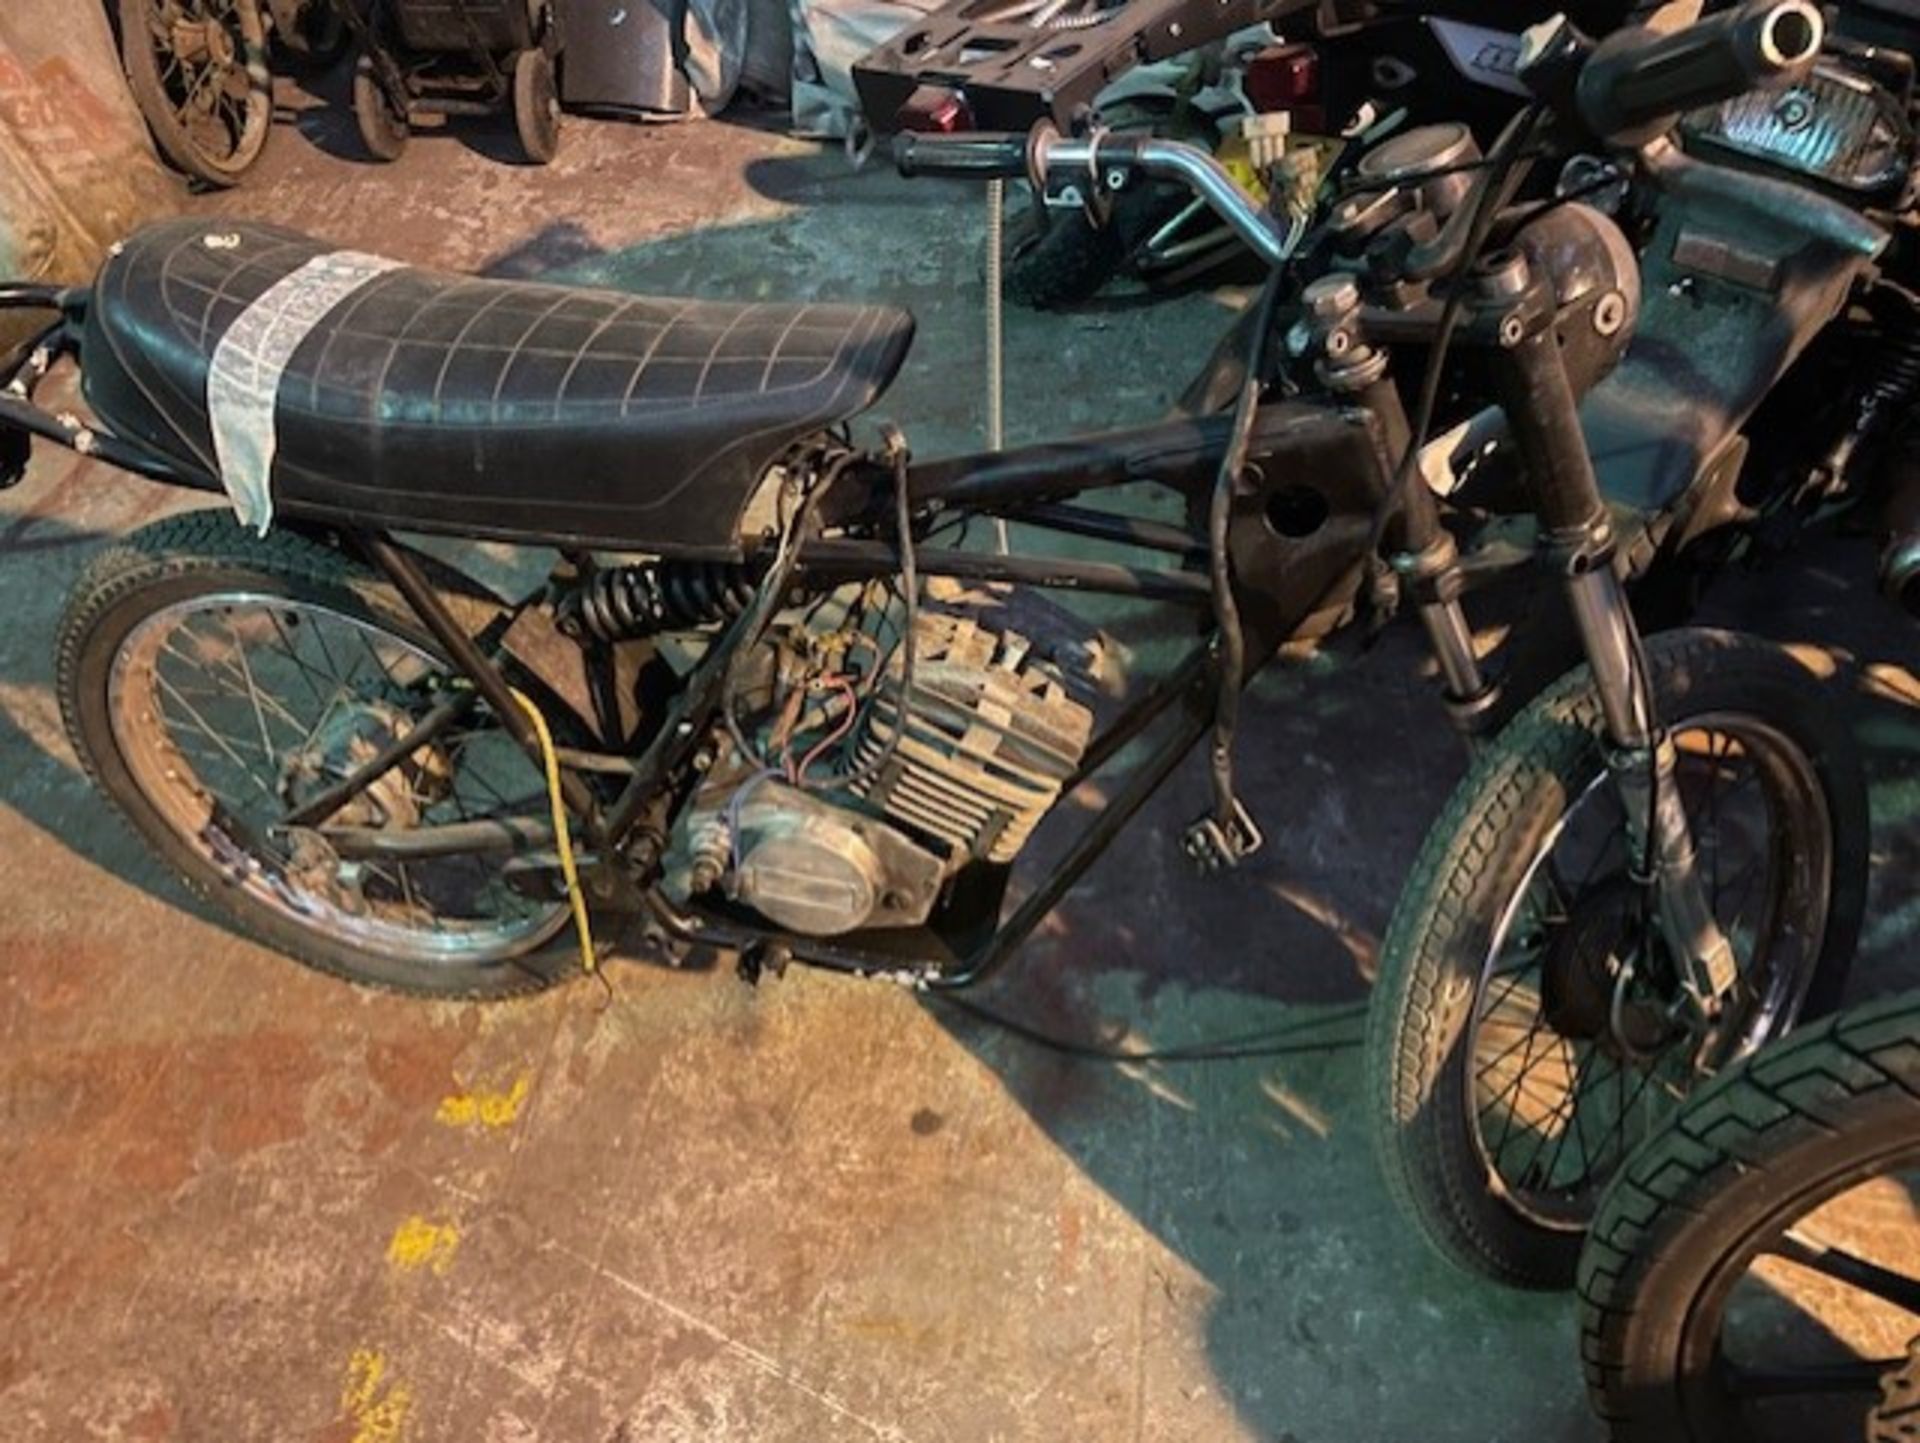 BSA beaver 50cc 1986 dreg it was stripped to do a restore painted frame but not put back together - Image 2 of 2